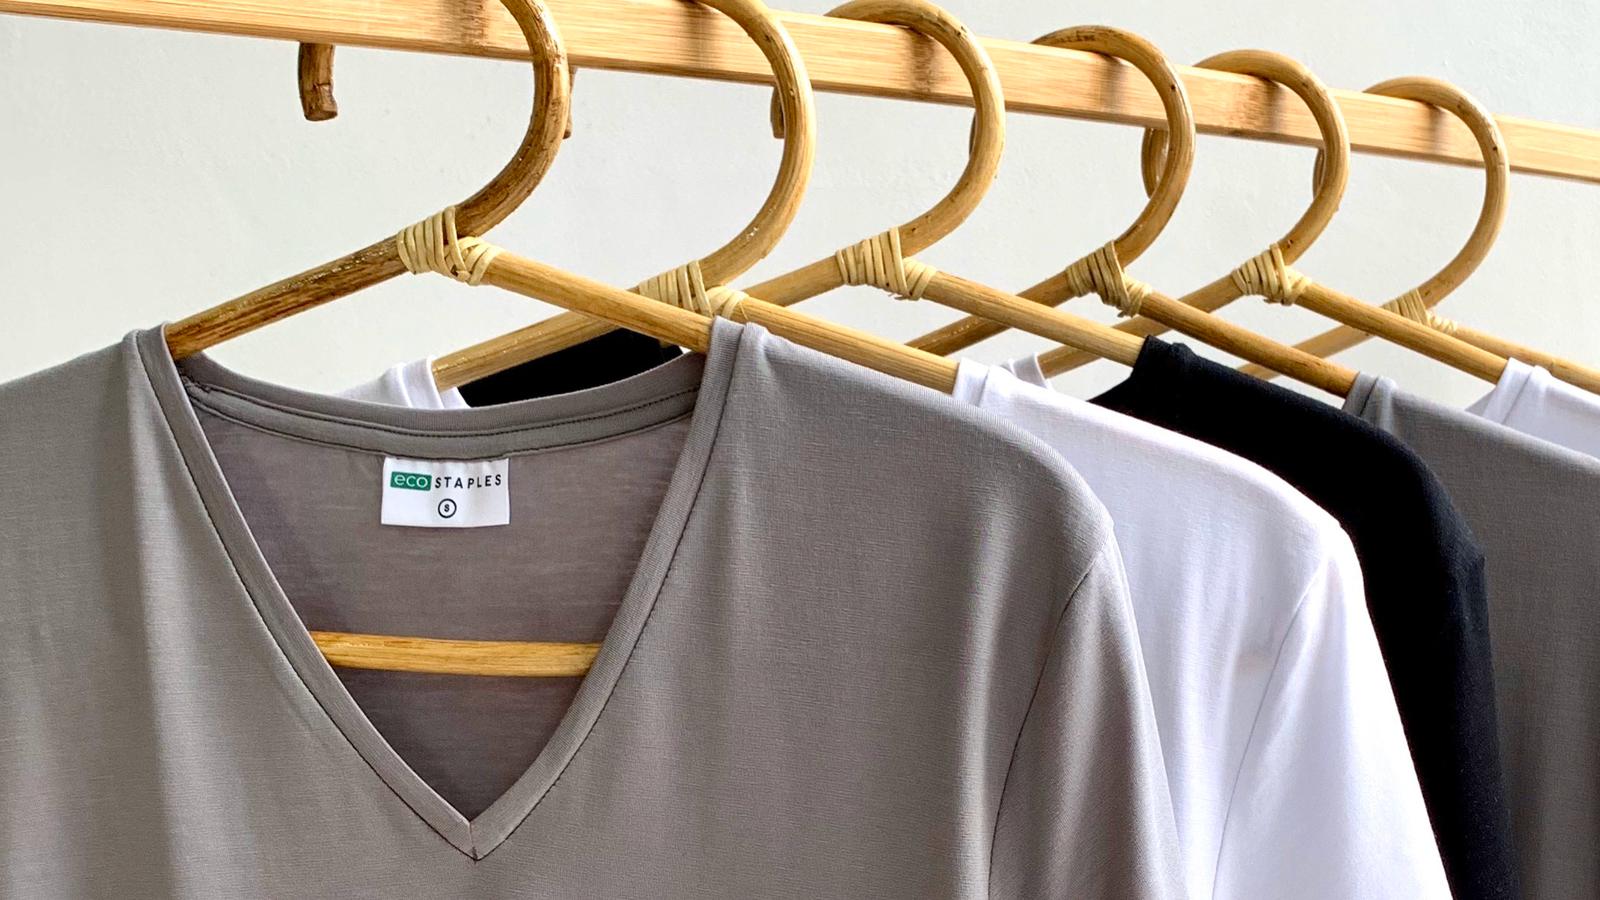 Bamboo Lyocell Eco T-shirts from Eco Staples